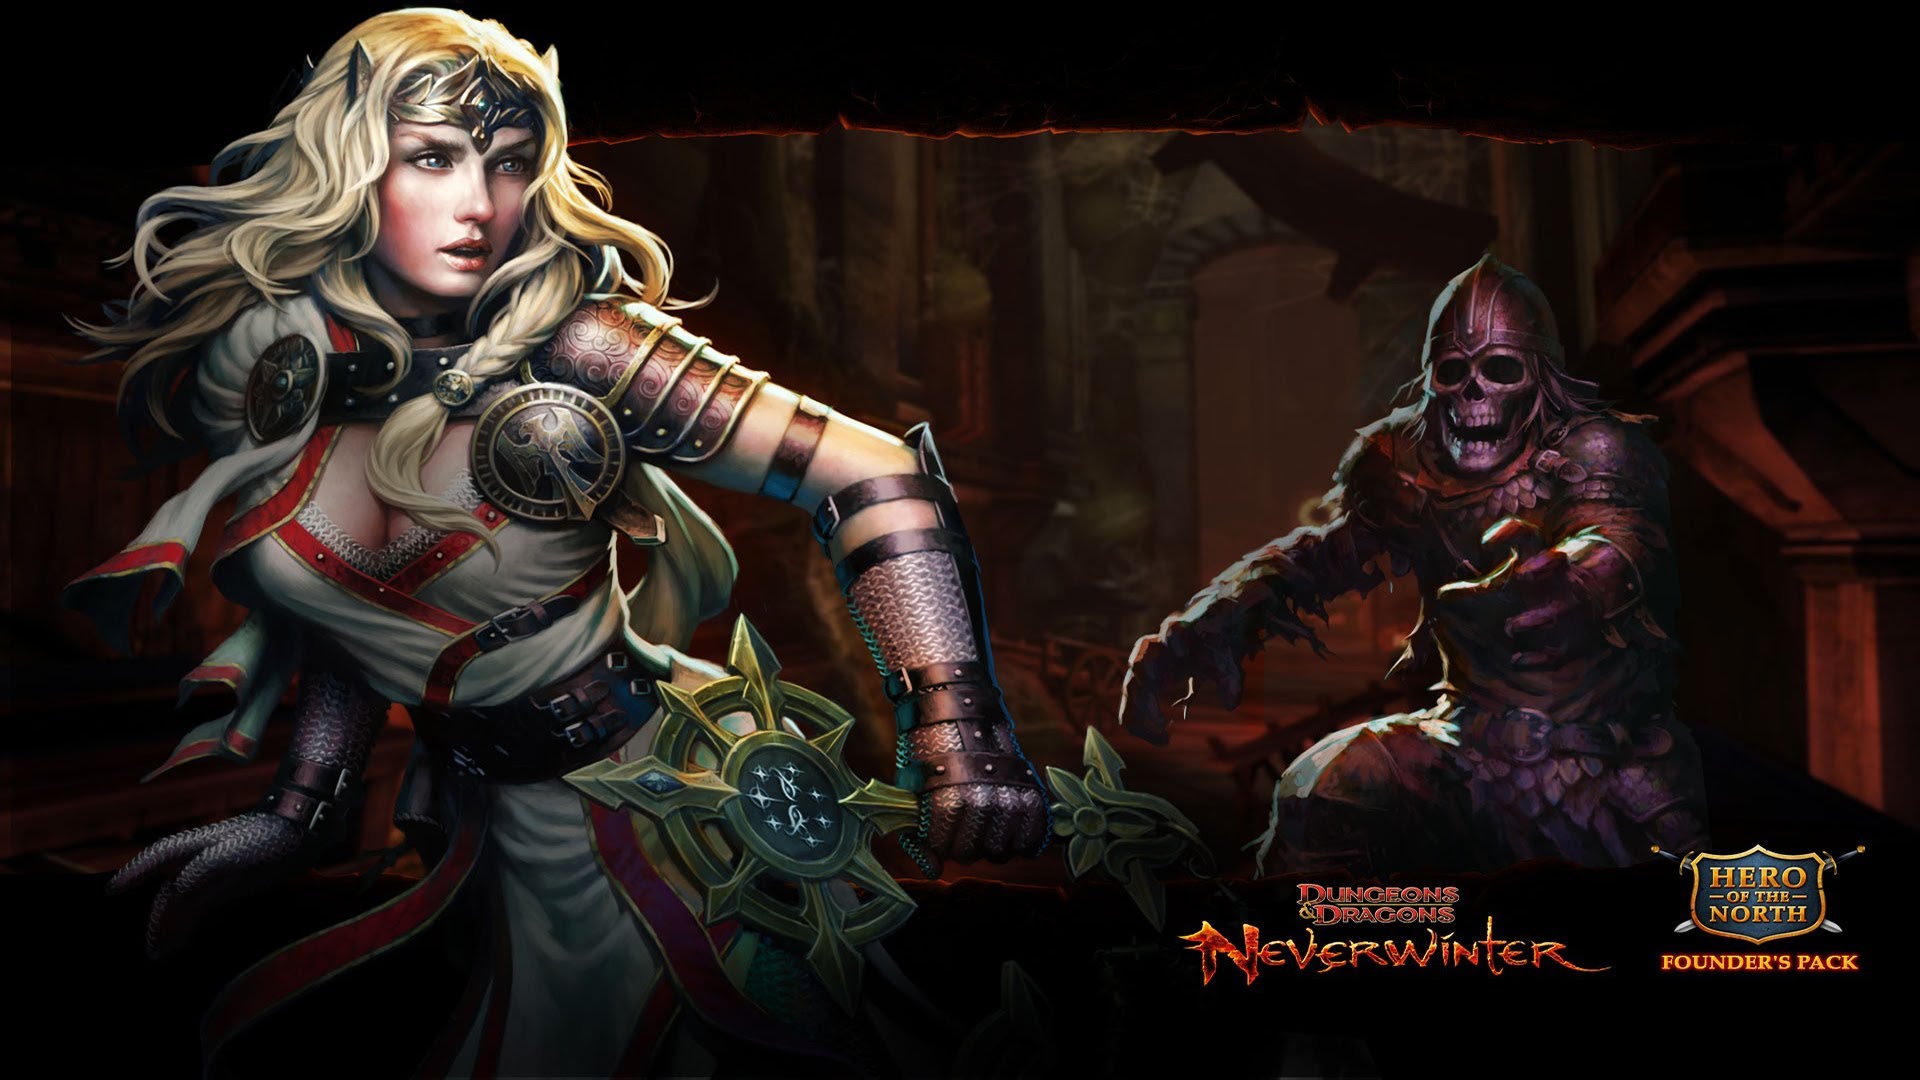 Amazing Dungeons & Dragons: Neverwinter Pictures & Backgrounds